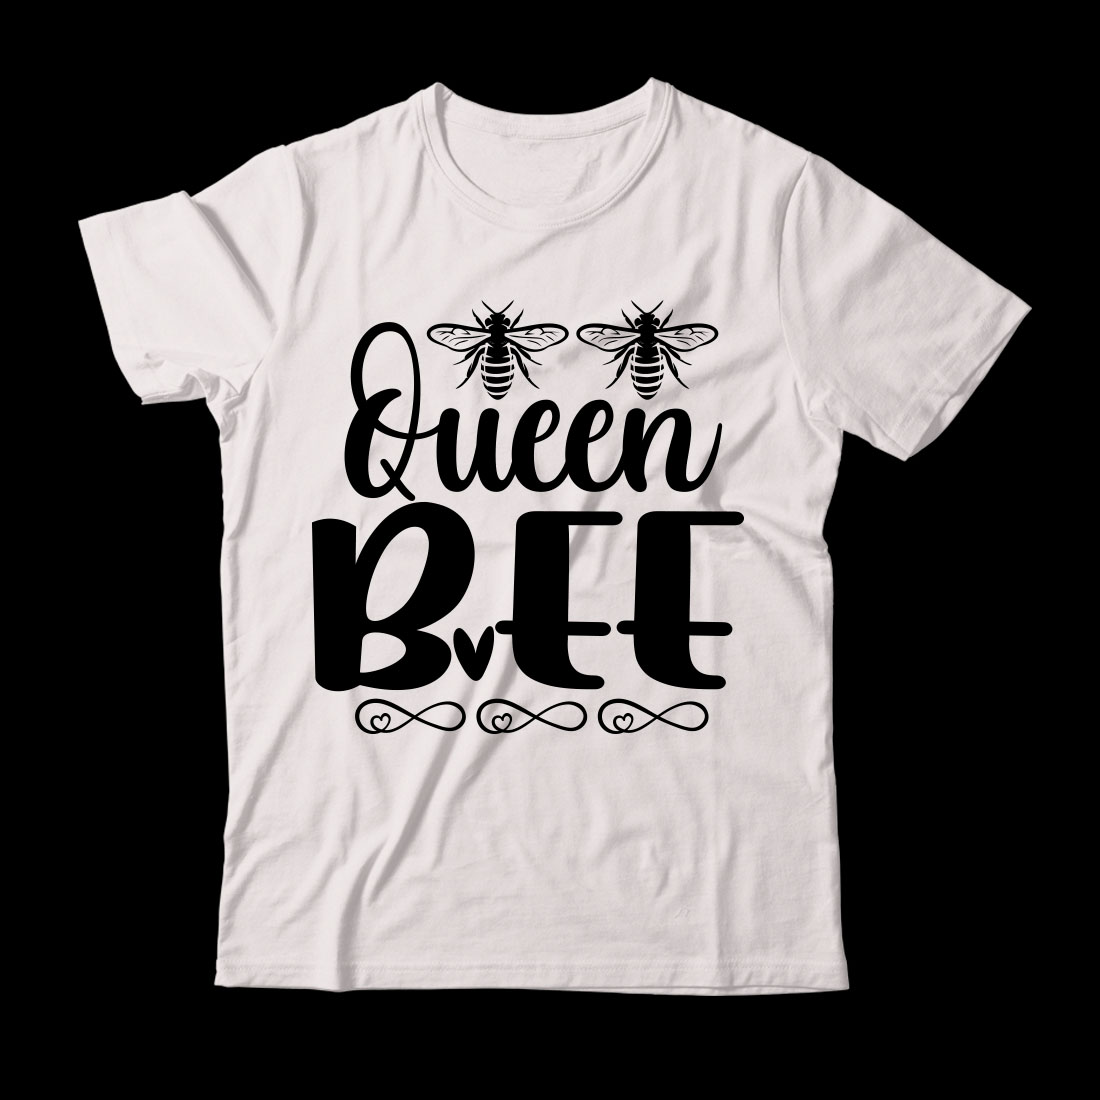 White t - shirt with the words queen bee on it.